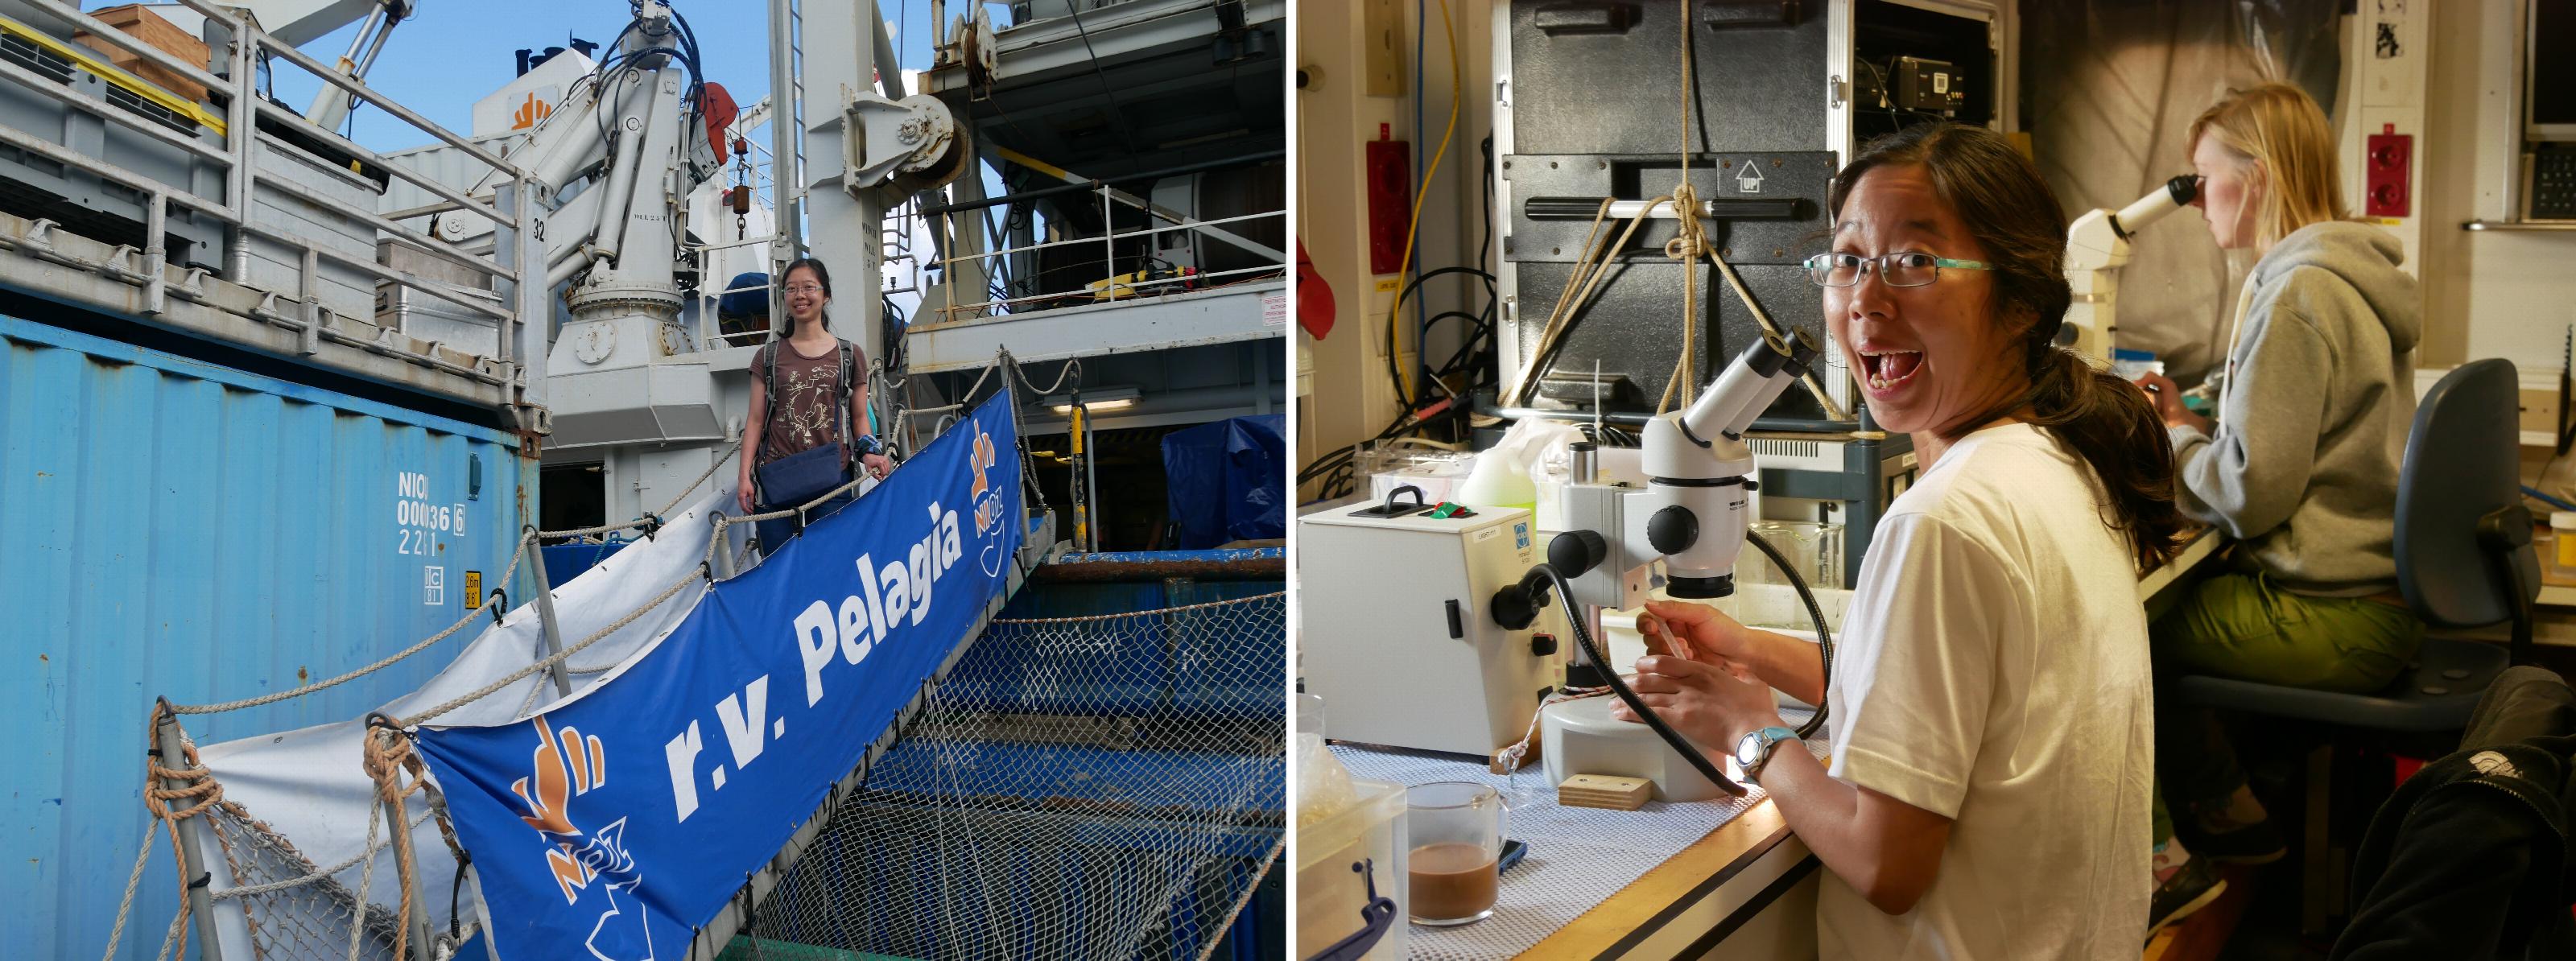 Le Qin studying pteropods on board the Pelagia research vessel, together with her fellow PhD student Lisette Mekkes